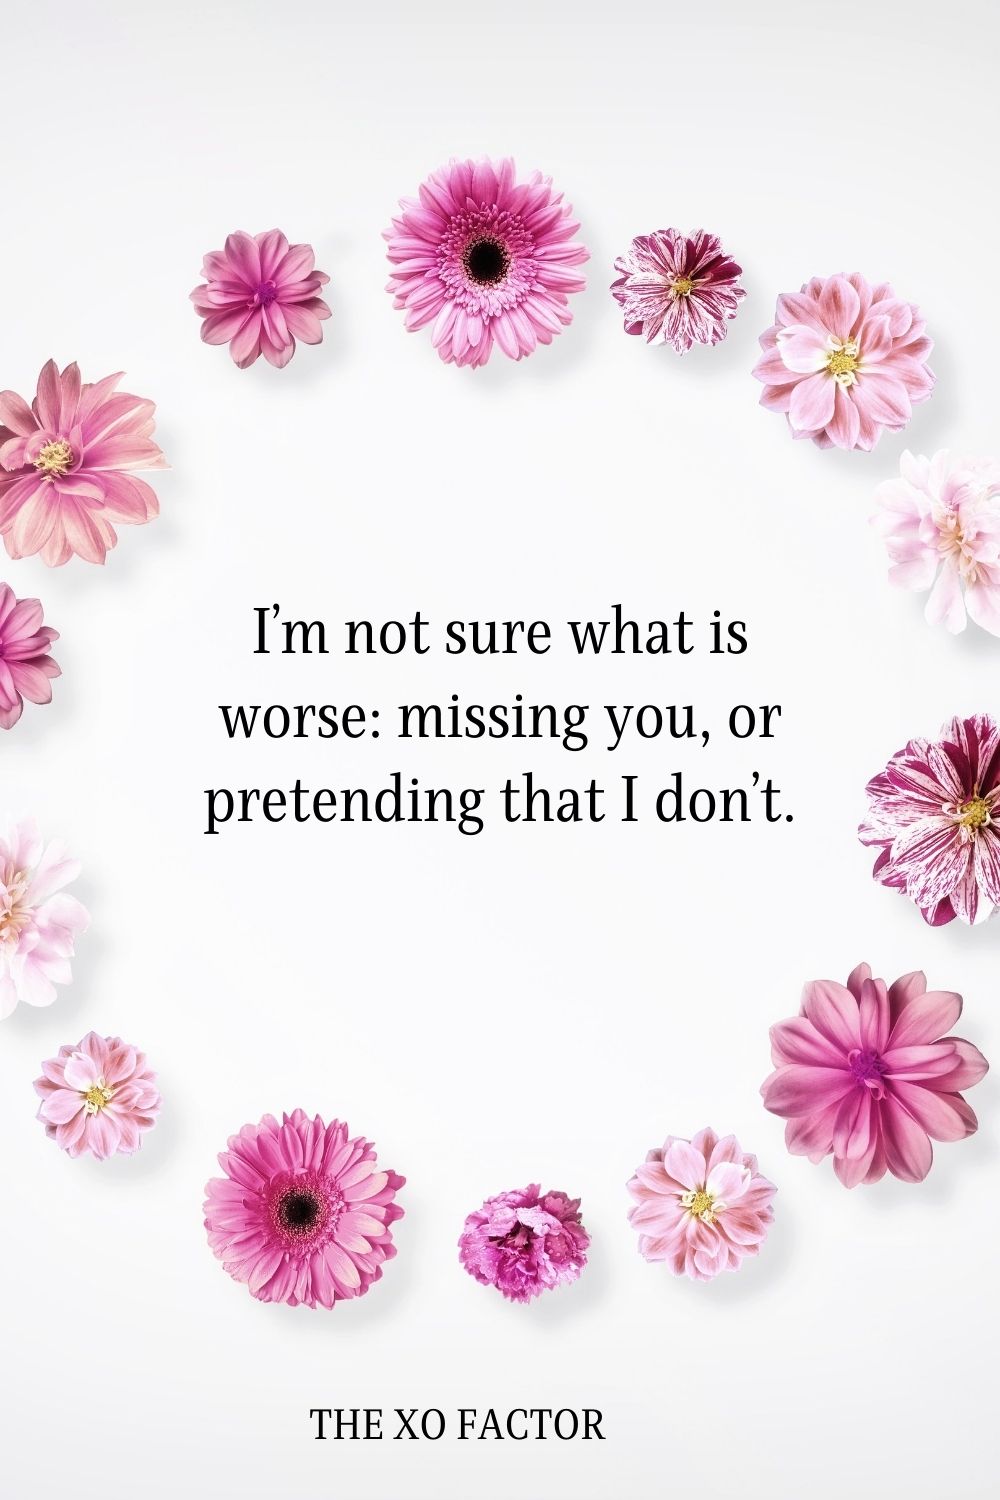 I’m not sure what is worse: missing you, or pretending that I don’t.